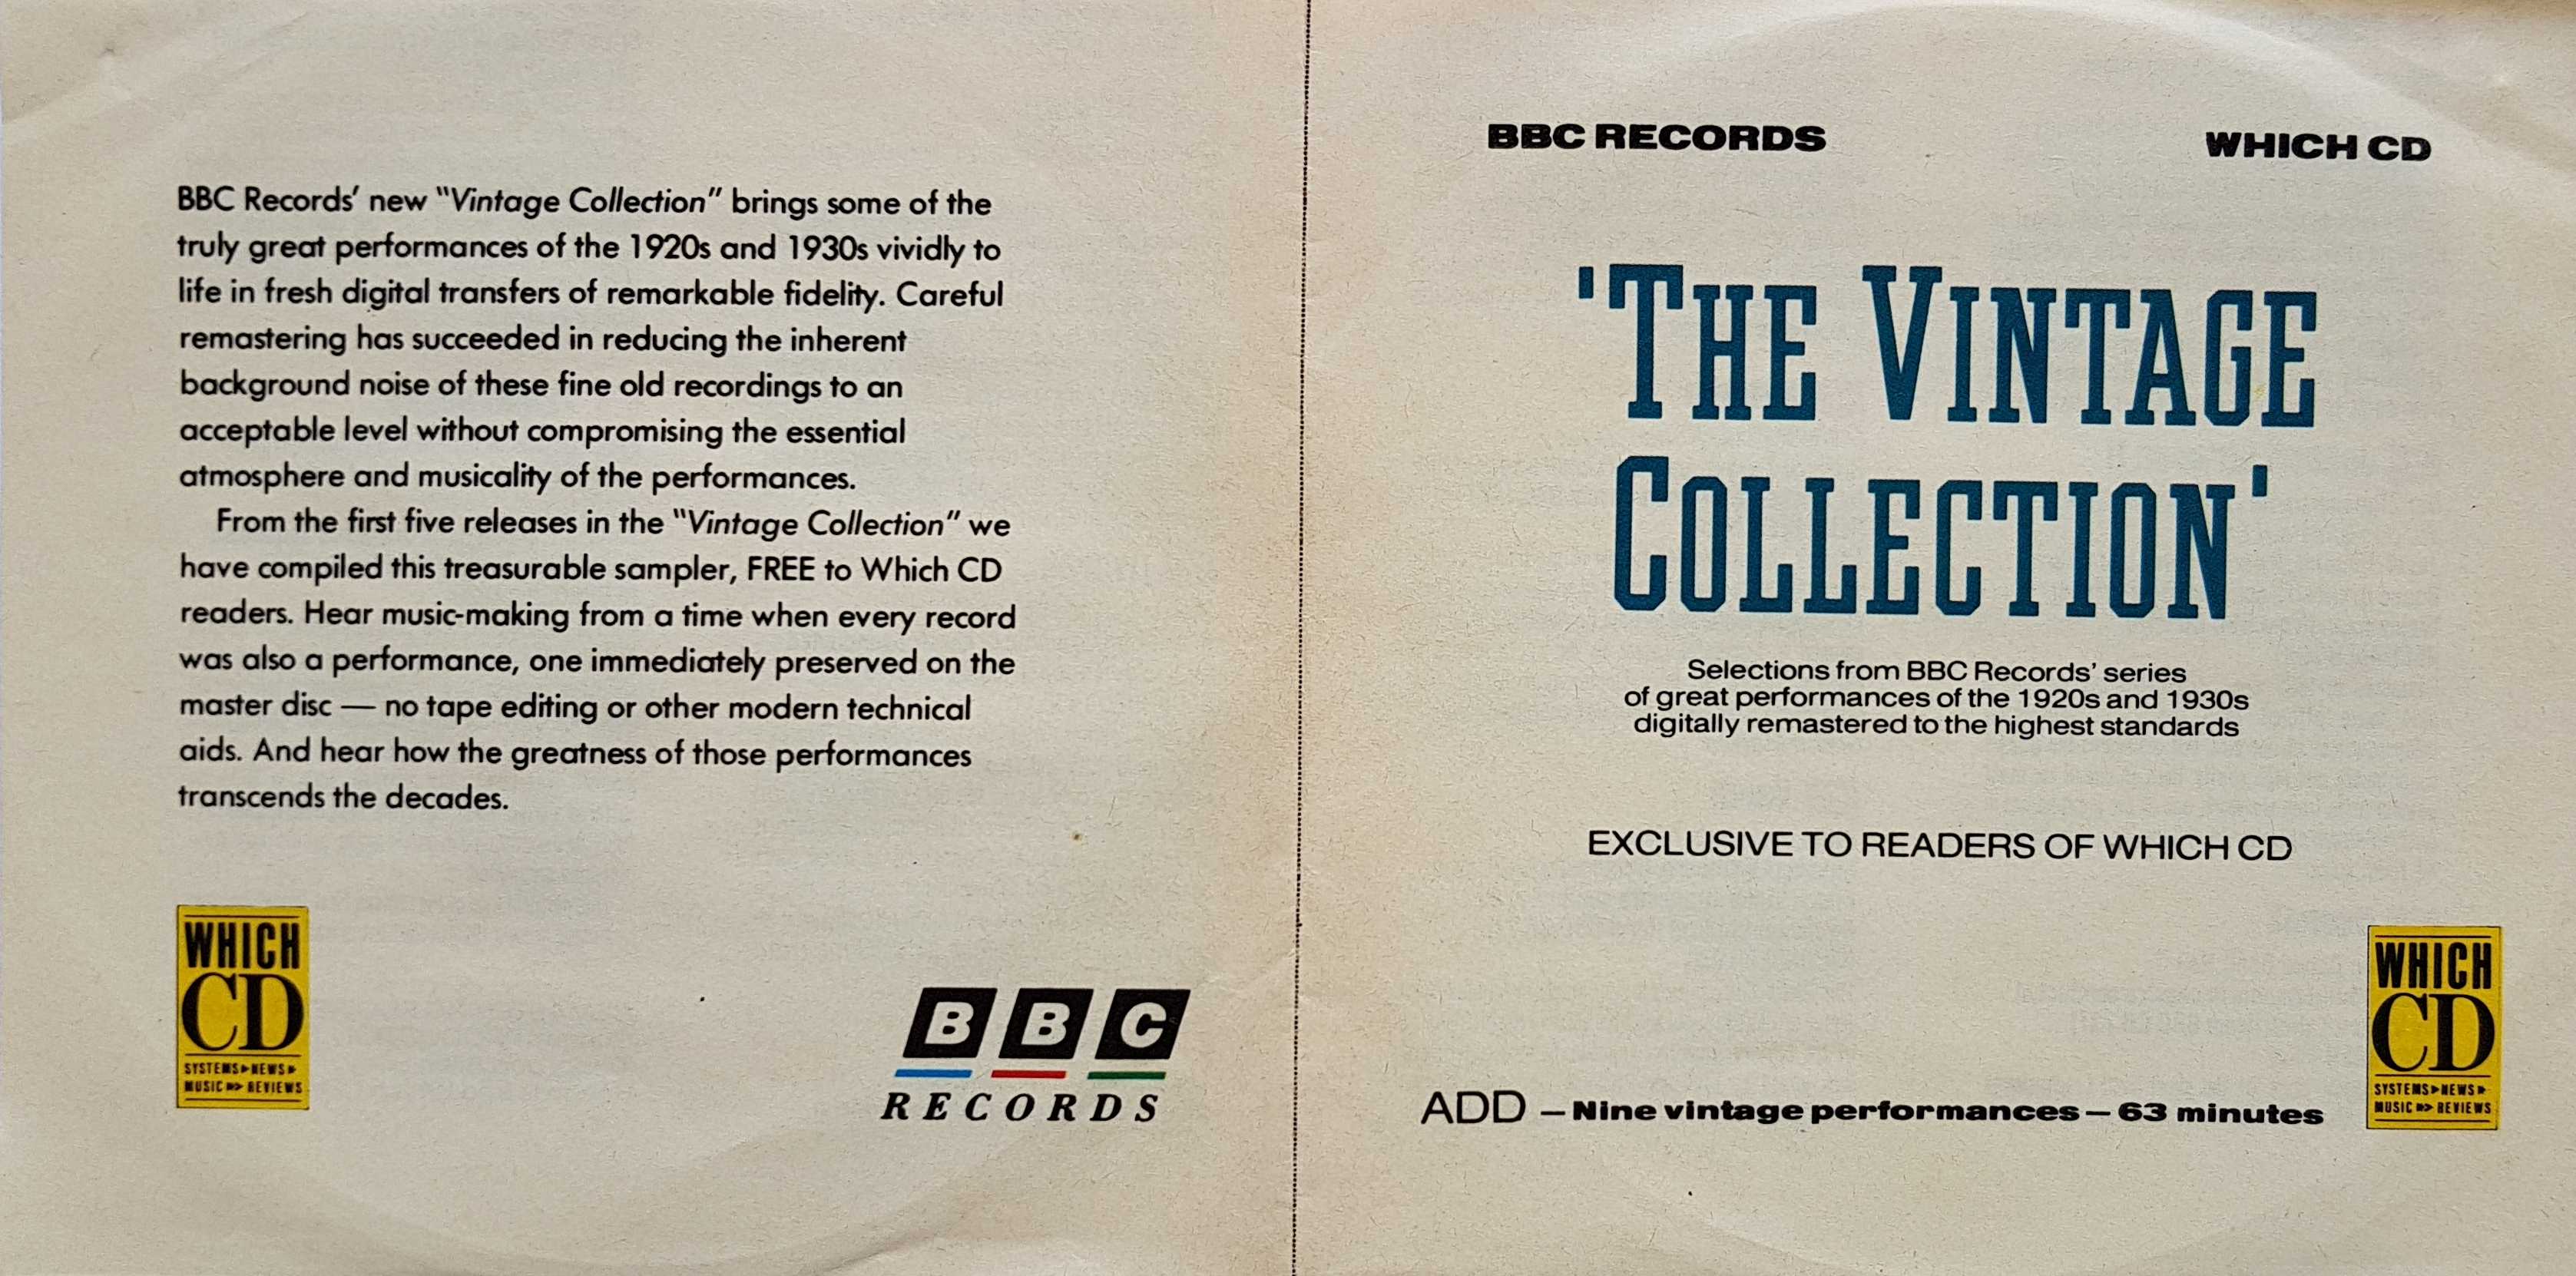 Picture of The vintage collection by artist Various from the BBC cds - Records and Tapes library